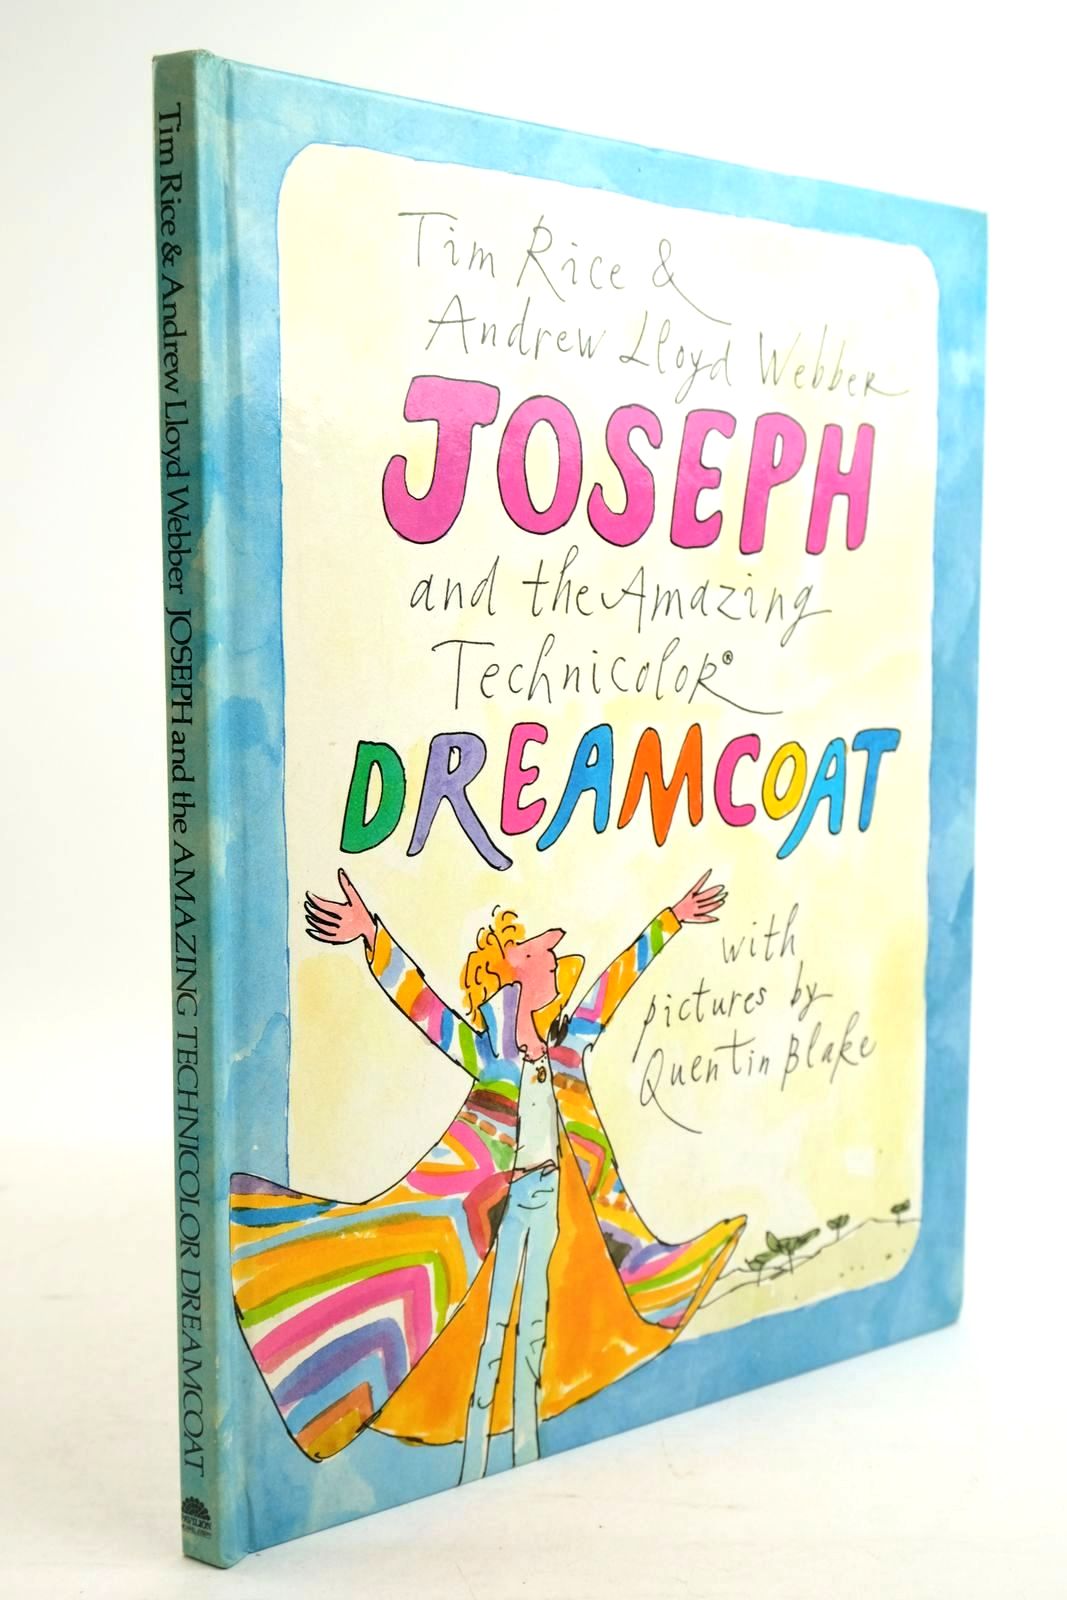 Photo of JOSEPH AND THE AMAZING TECHNICOLOR DREAMCOAT written by Rice, Tim Webber, Andrew Lloyd illustrated by Blake, Quentin published by Pavilion, Michael Joseph (STOCK CODE: 1320976)  for sale by Stella & Rose's Books